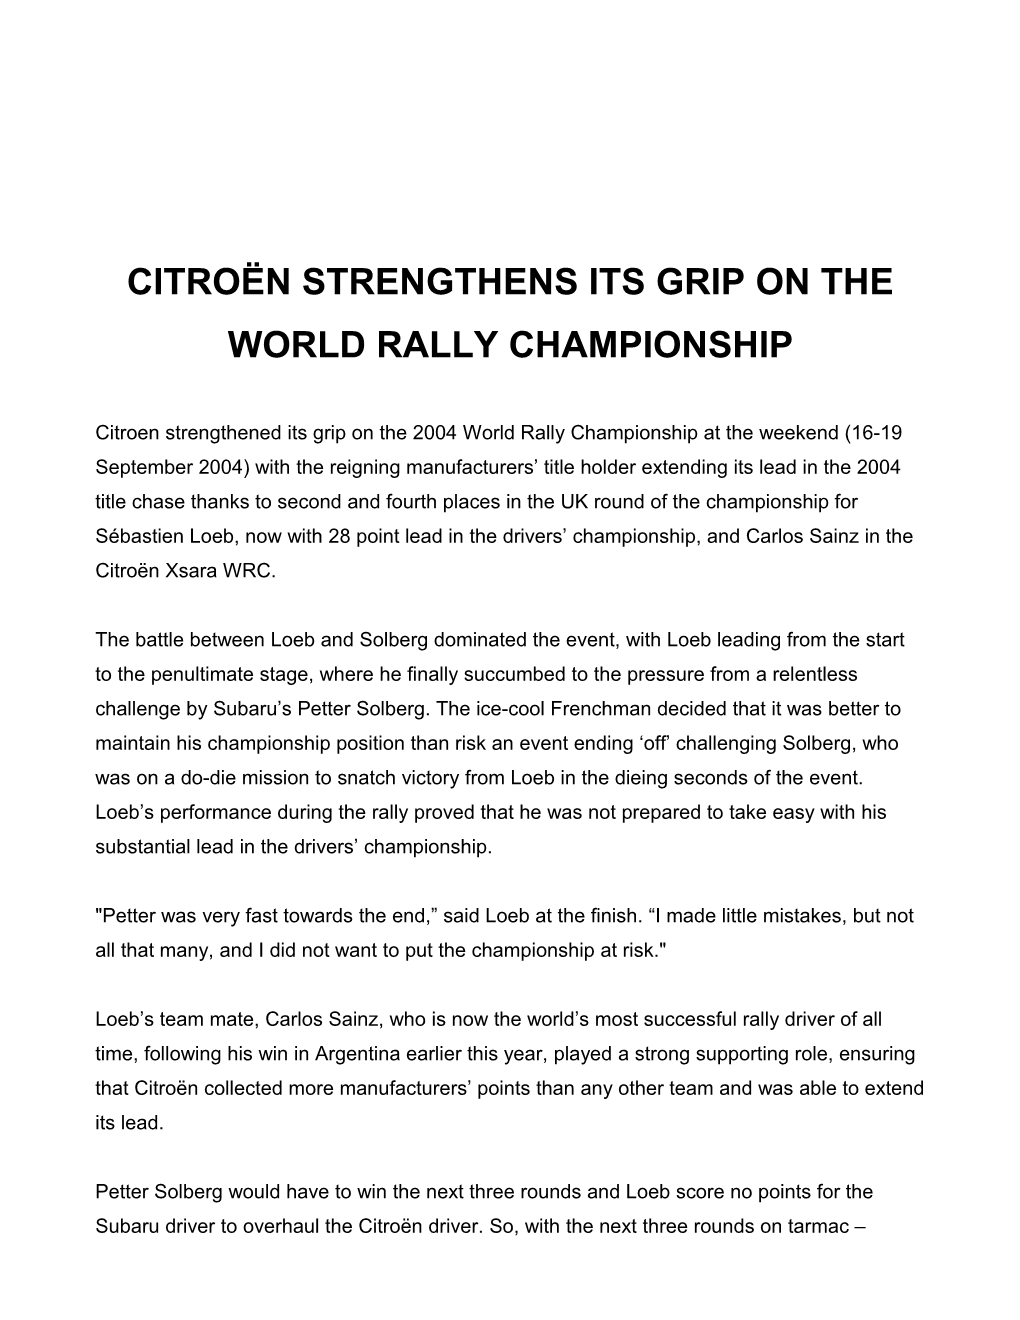 Citroën Strengthens Its Grip on the World Rally Championship